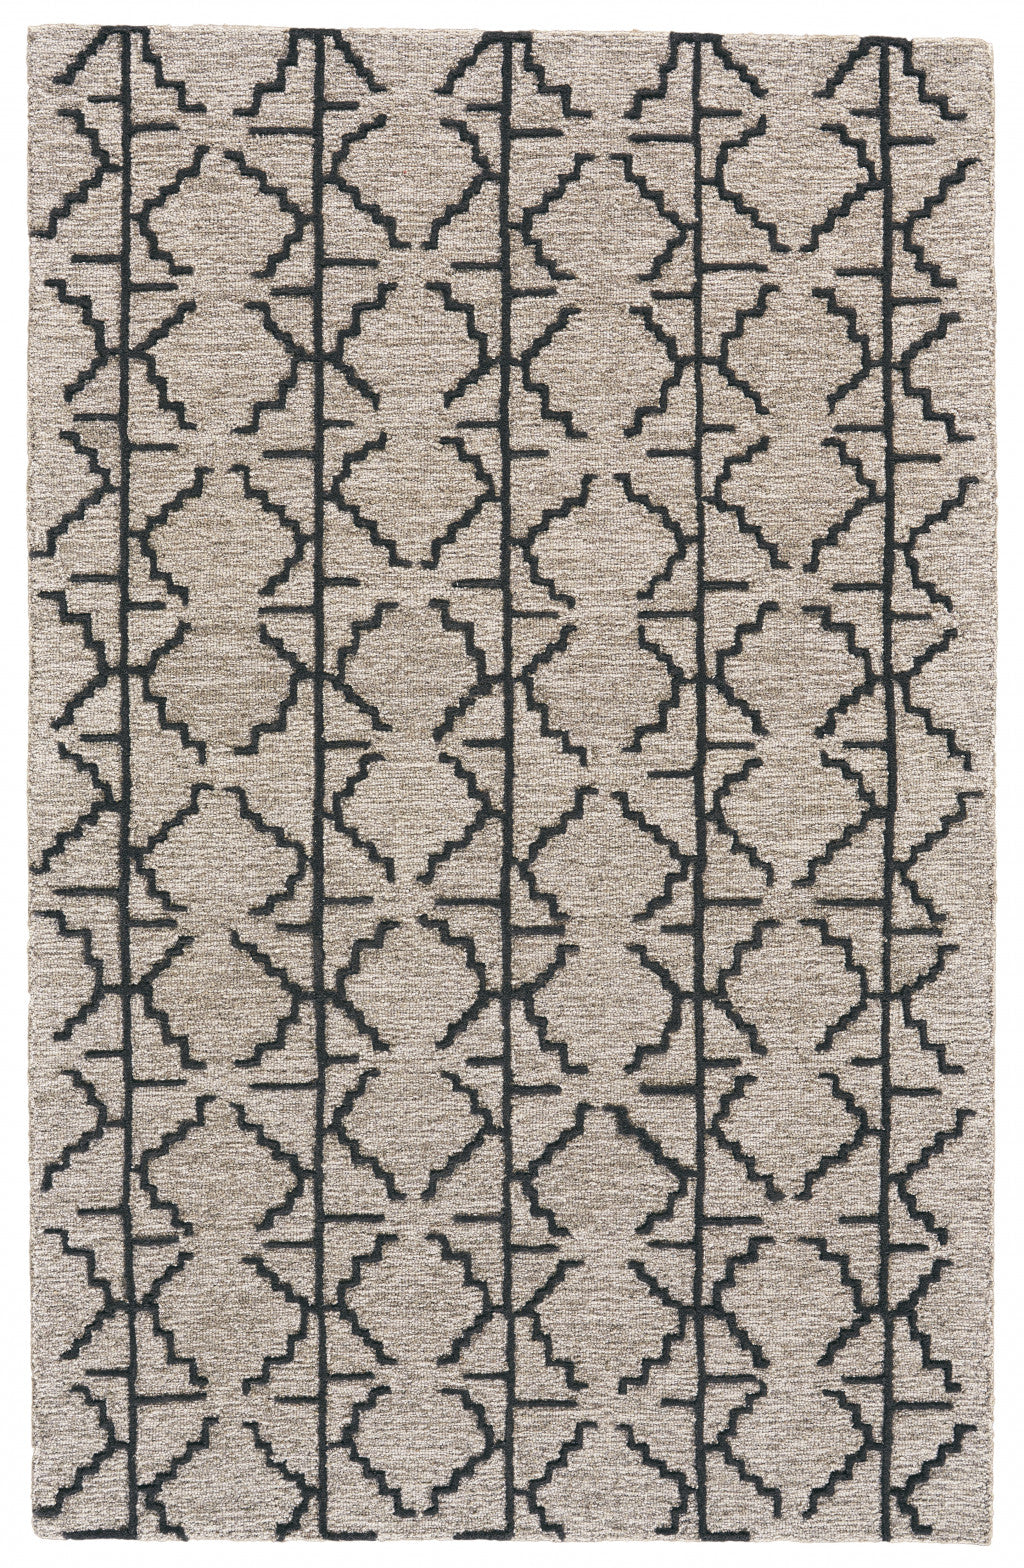 4' X 6' Black Taupe And Gray Wool Geometric Tufted Handmade Stain Resistant Area Rug